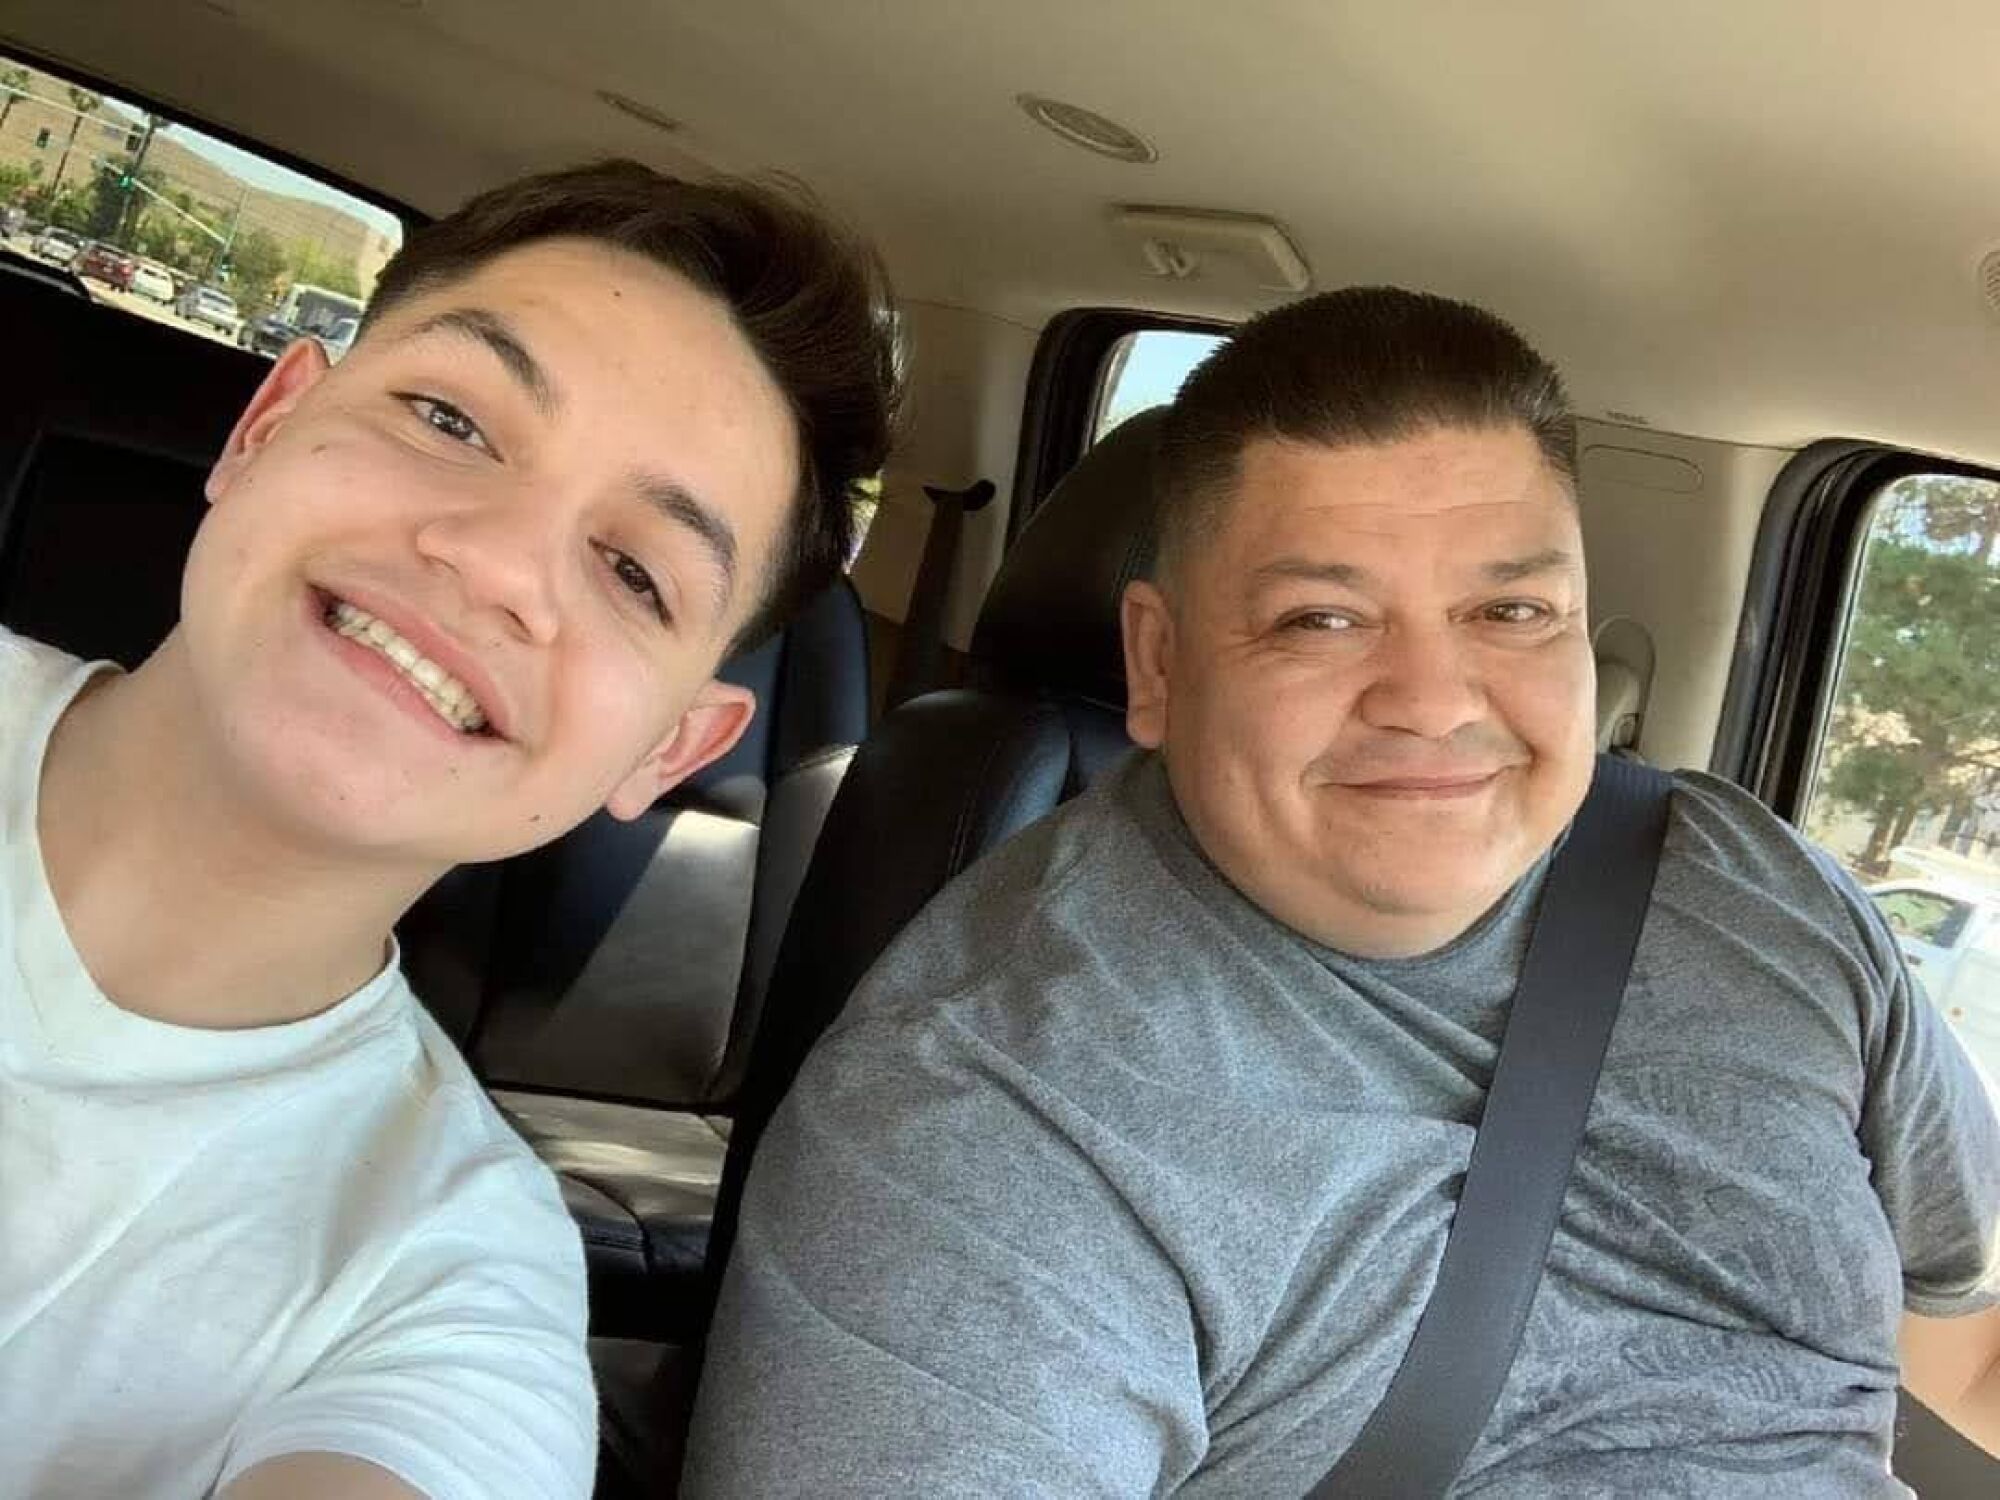 Anthony Michael Reyes Jr., in a selfie he took with his father Anthony Michael Reyes Sr., 46, after getting a haircut 